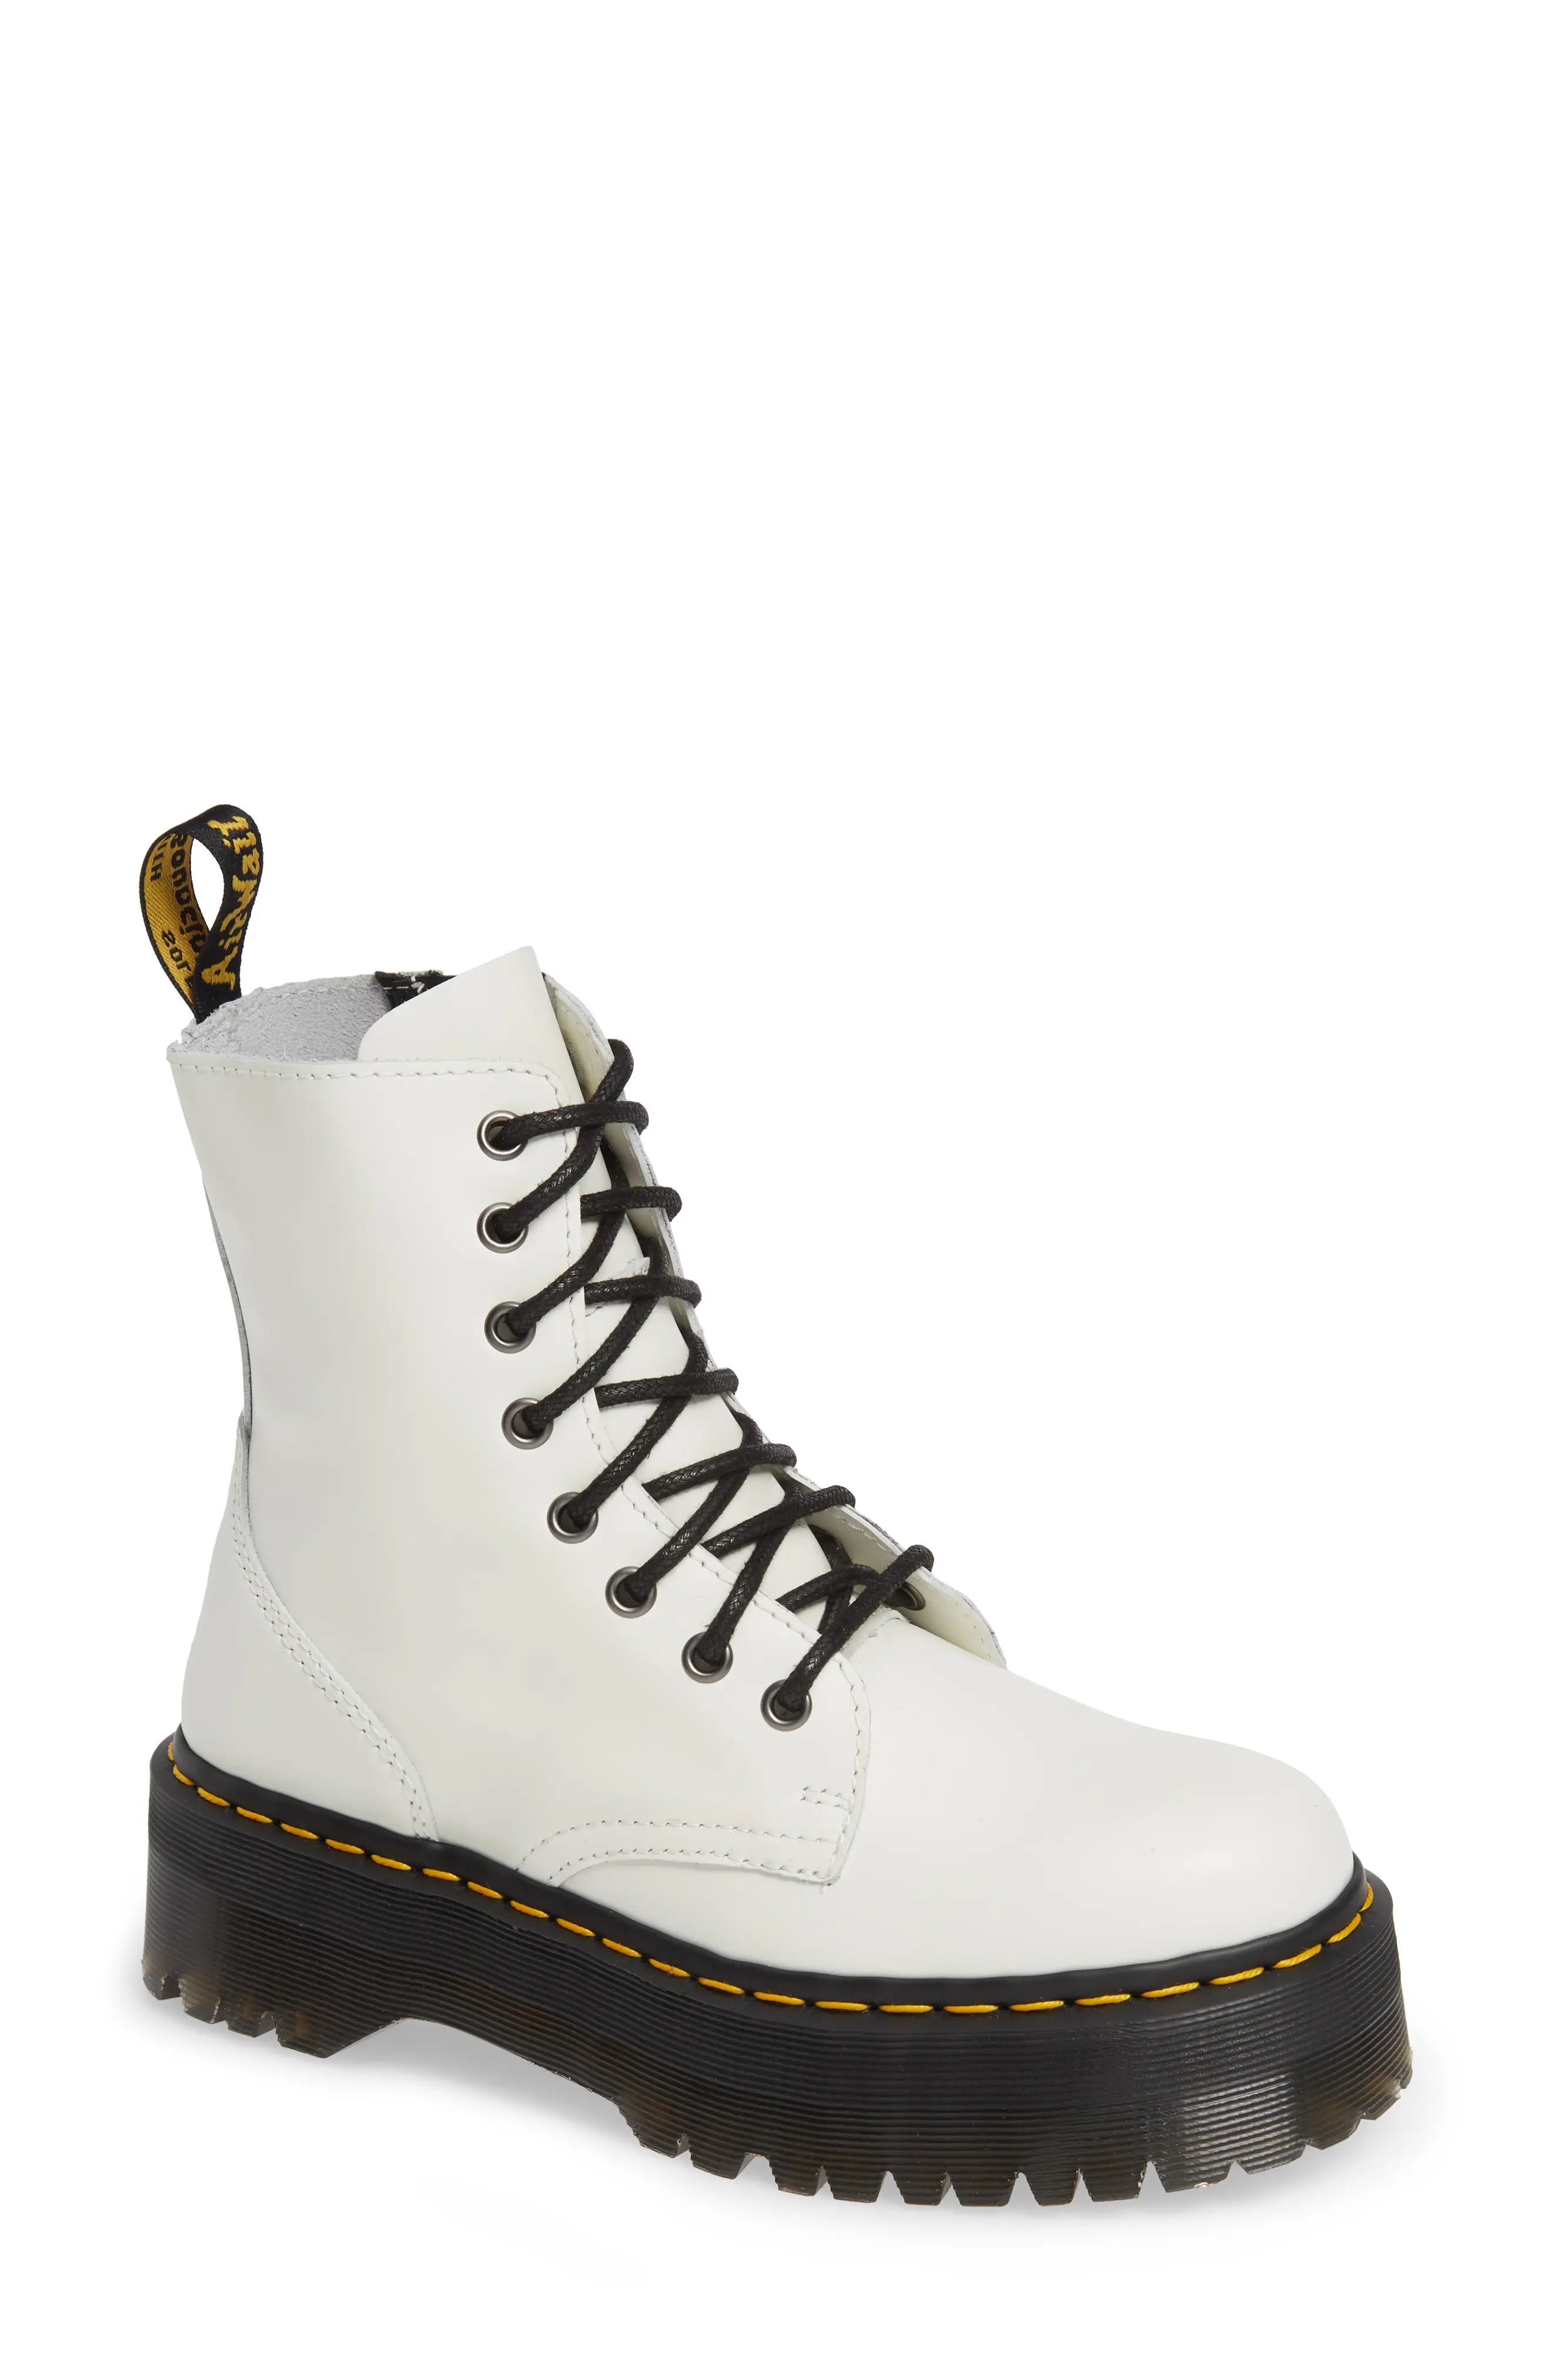 Dr. Martens 'Jadon' Boot, Size 11Us in White Smooth Leather at Nordstrom | Nordstrom